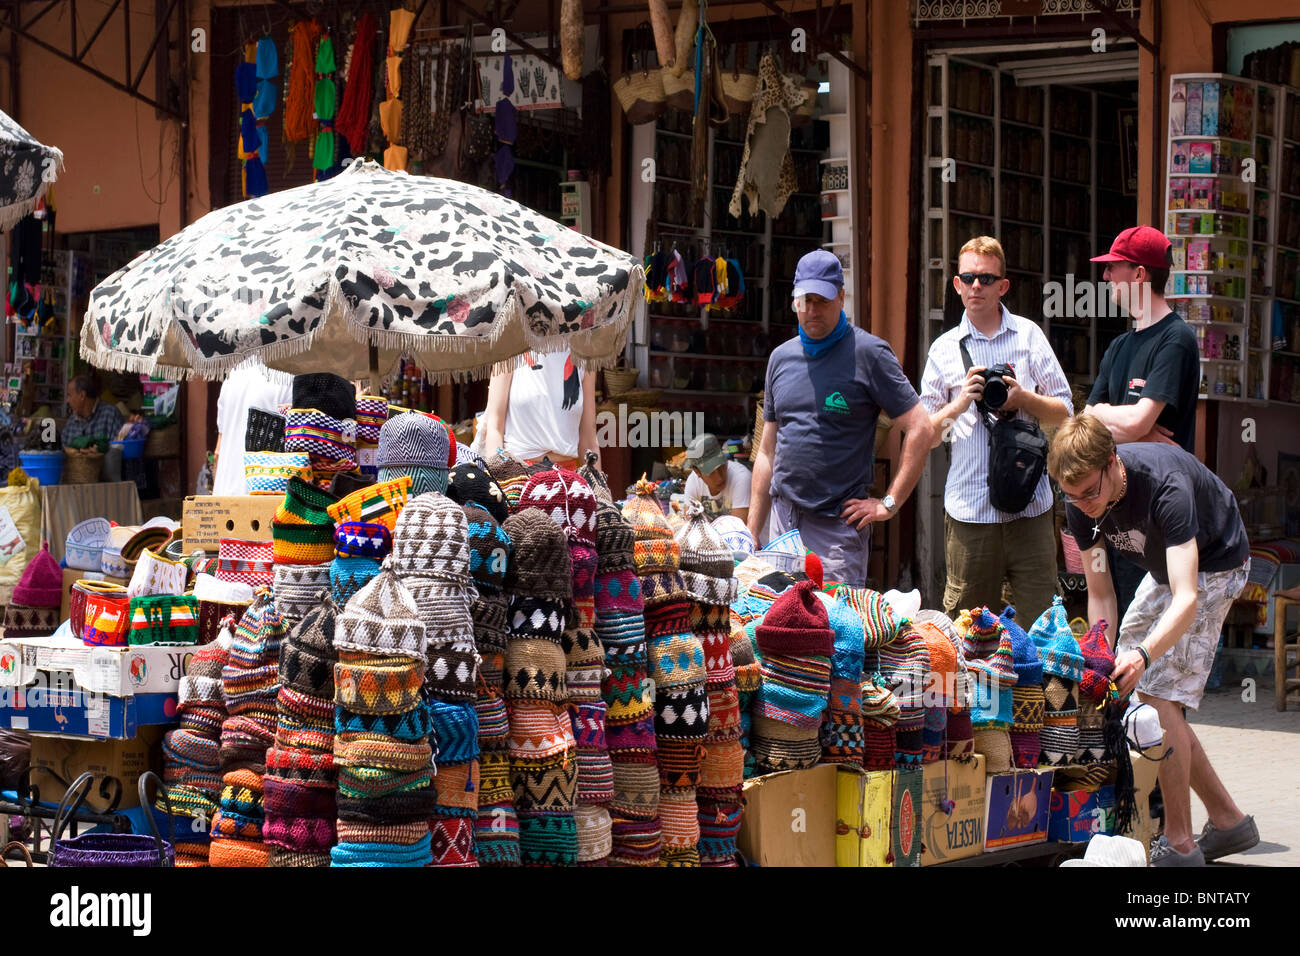 Tourists looking at hat stall in Djemaa El Fna Marrakech Morocco Stock Photo